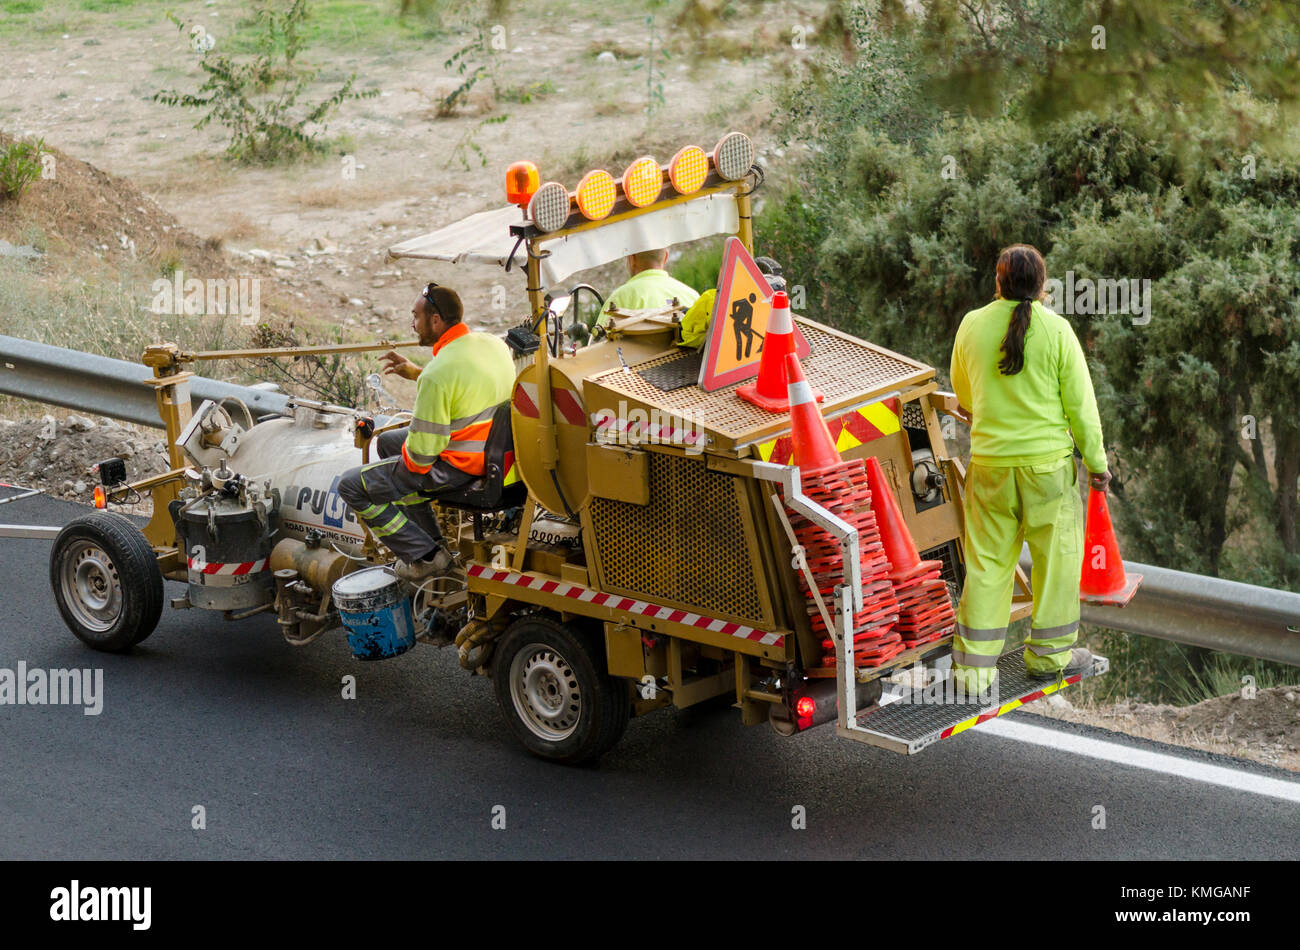 Street workers on machine, Traffic line painting, road marking, Spain. Stock Photo